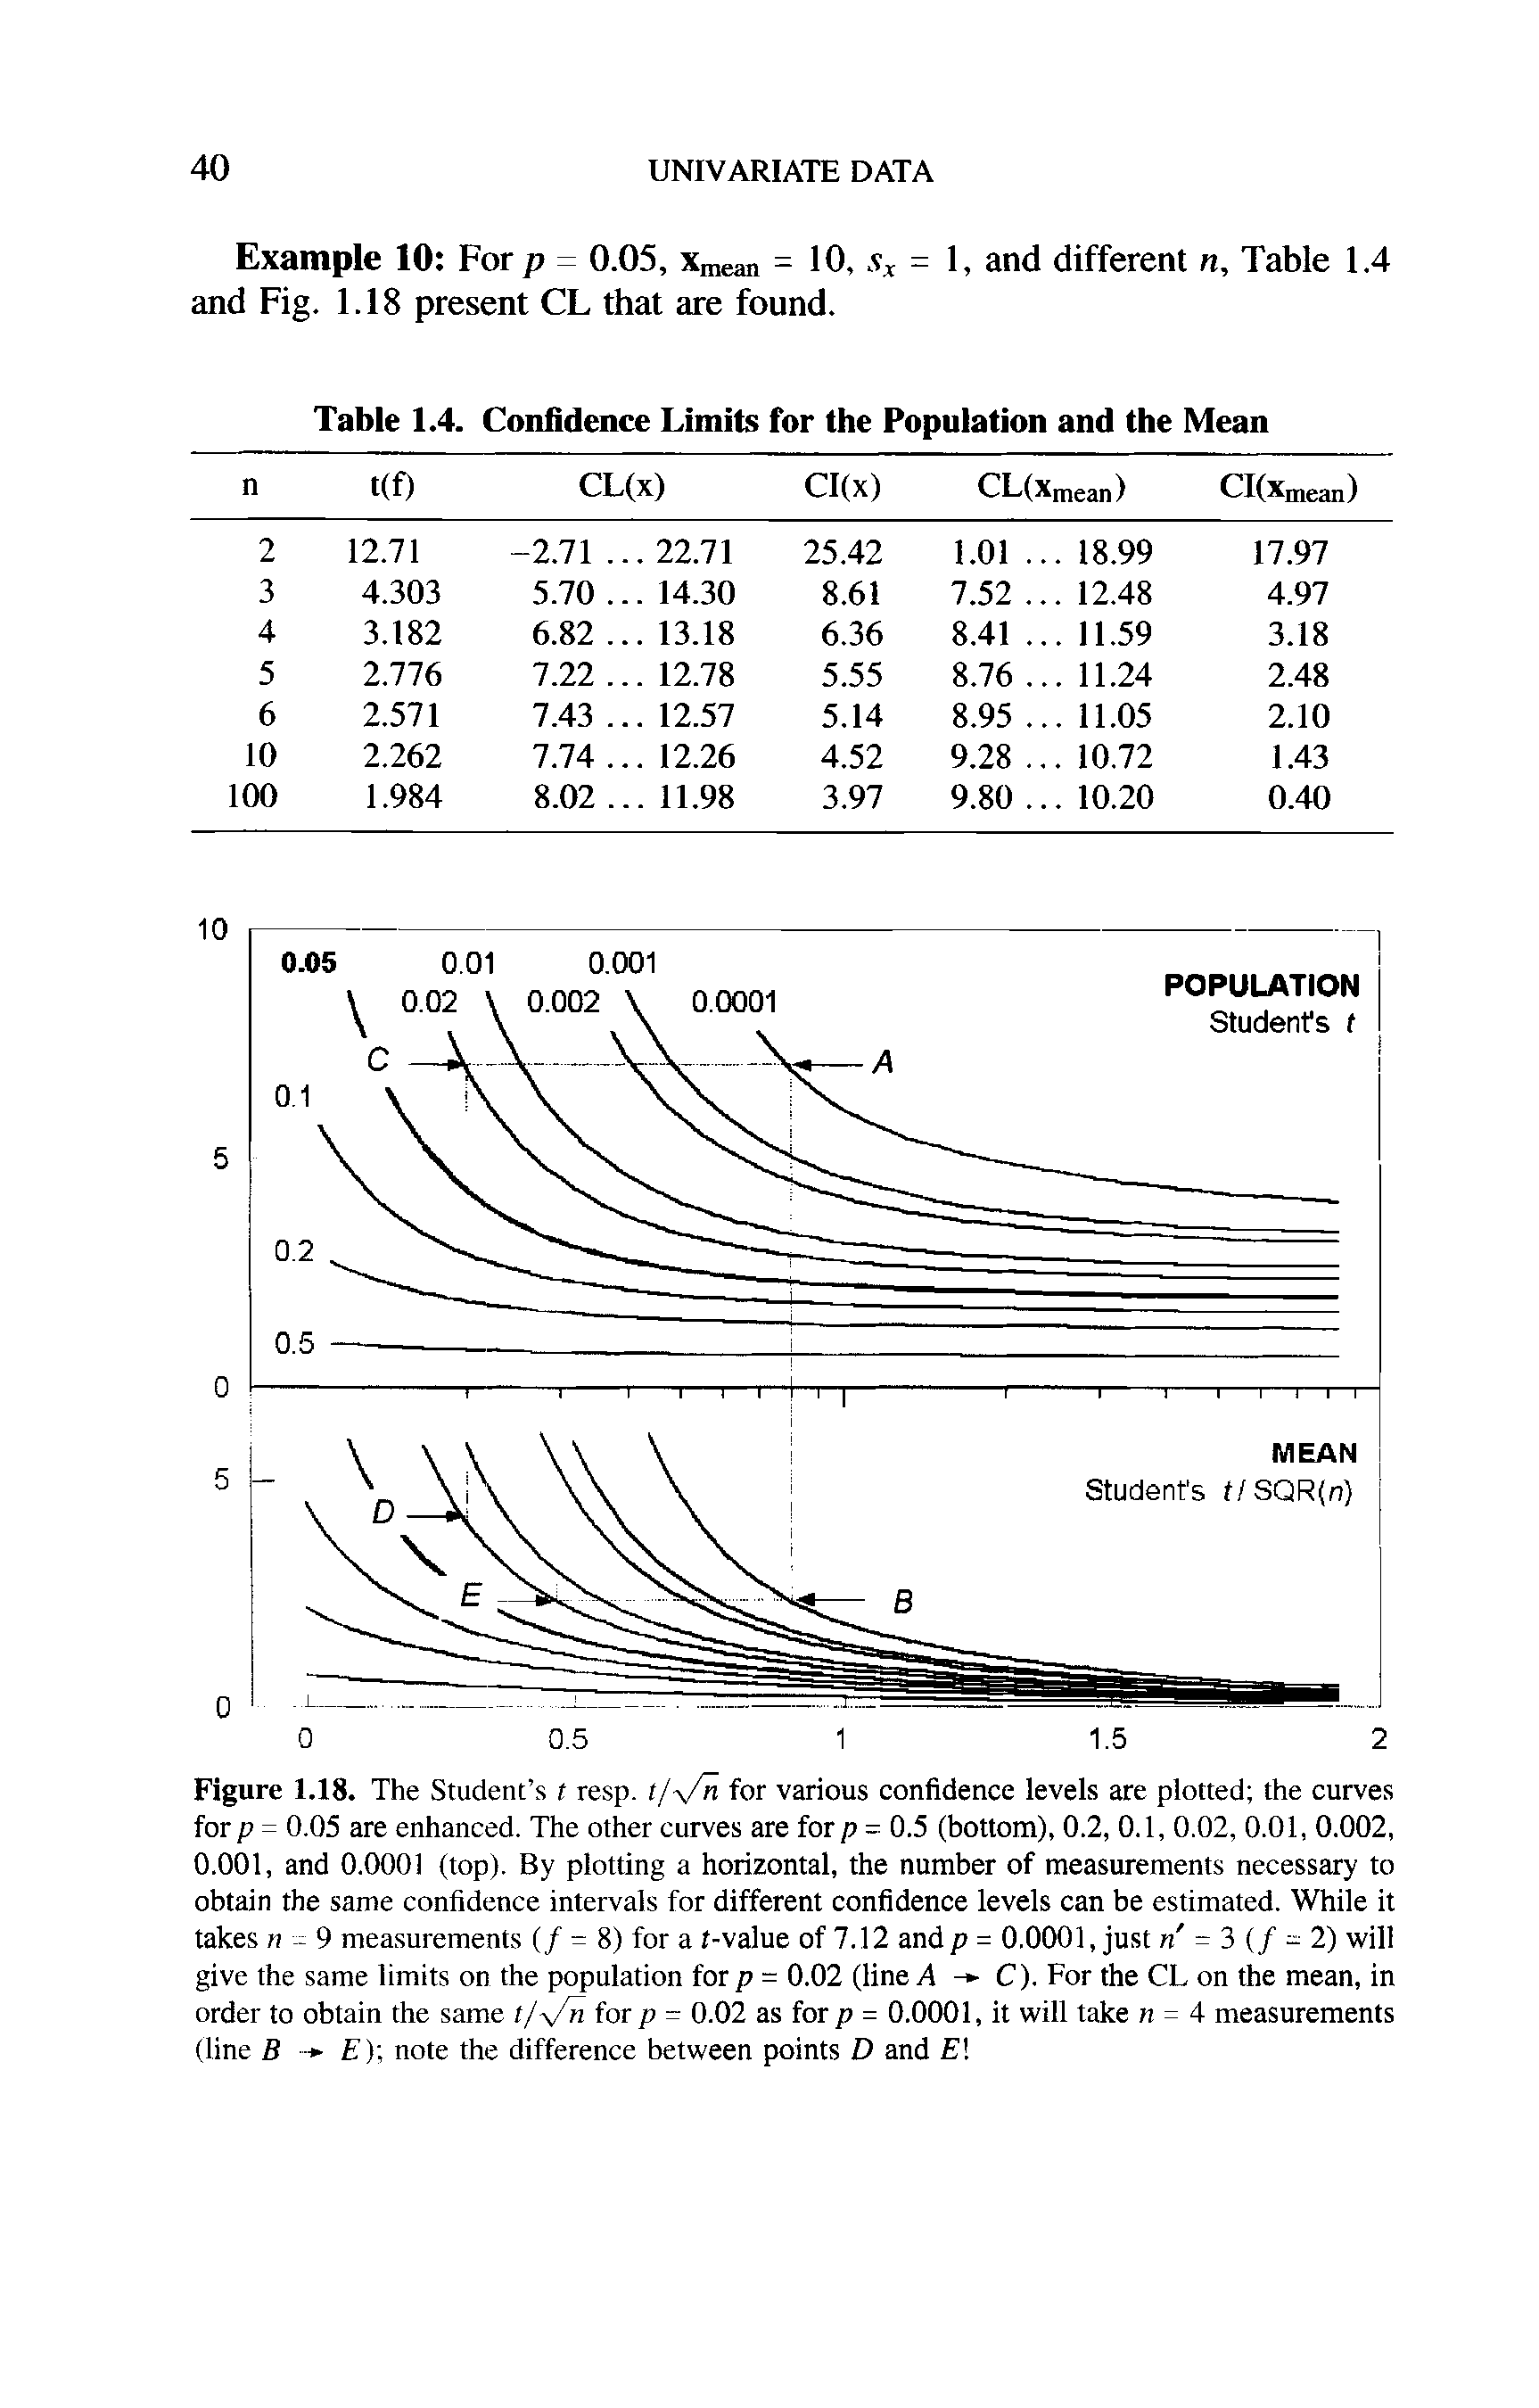 Figure 1.18. The Student s ( resp. t/Vn for various confidence levels are plotted the curves for p = 0.05 are enhanced. The other curves are for p = 0.5 (bottom), 0.2, 0.1, 0.02, 0.01, 0.002, 0.001, and 0.0001 (top). By plotting a horizontal, the number of measurements necessary to obtain the same confidence intervals for different confidence levels can be estimated. While it takes n - 9 measurements (/ = 8) for a t-value of 7.12 and p = 0.0001, just n = 3 f - 2) will give the same limits on the population for p = 0.02 (line A - C). For the CL on the mean, in order to obtain the same t/ /n for p = 0.02 as for p = 0.0001, it will take n = 4 measurements (line B ) note the difference between points D and ...